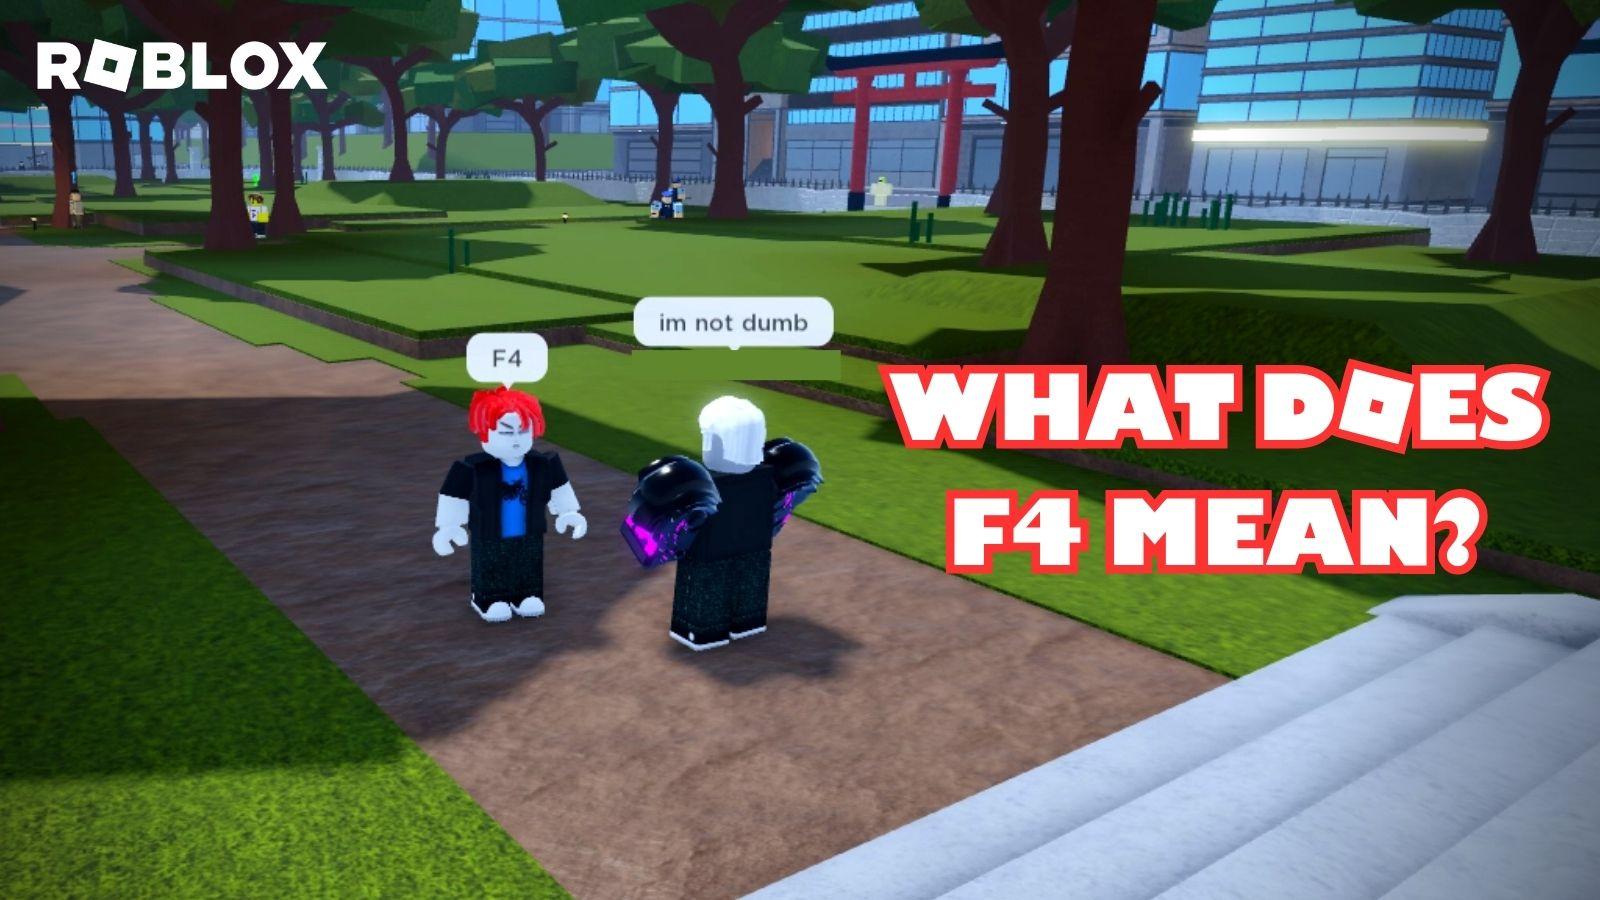 F4 in Roblox chat